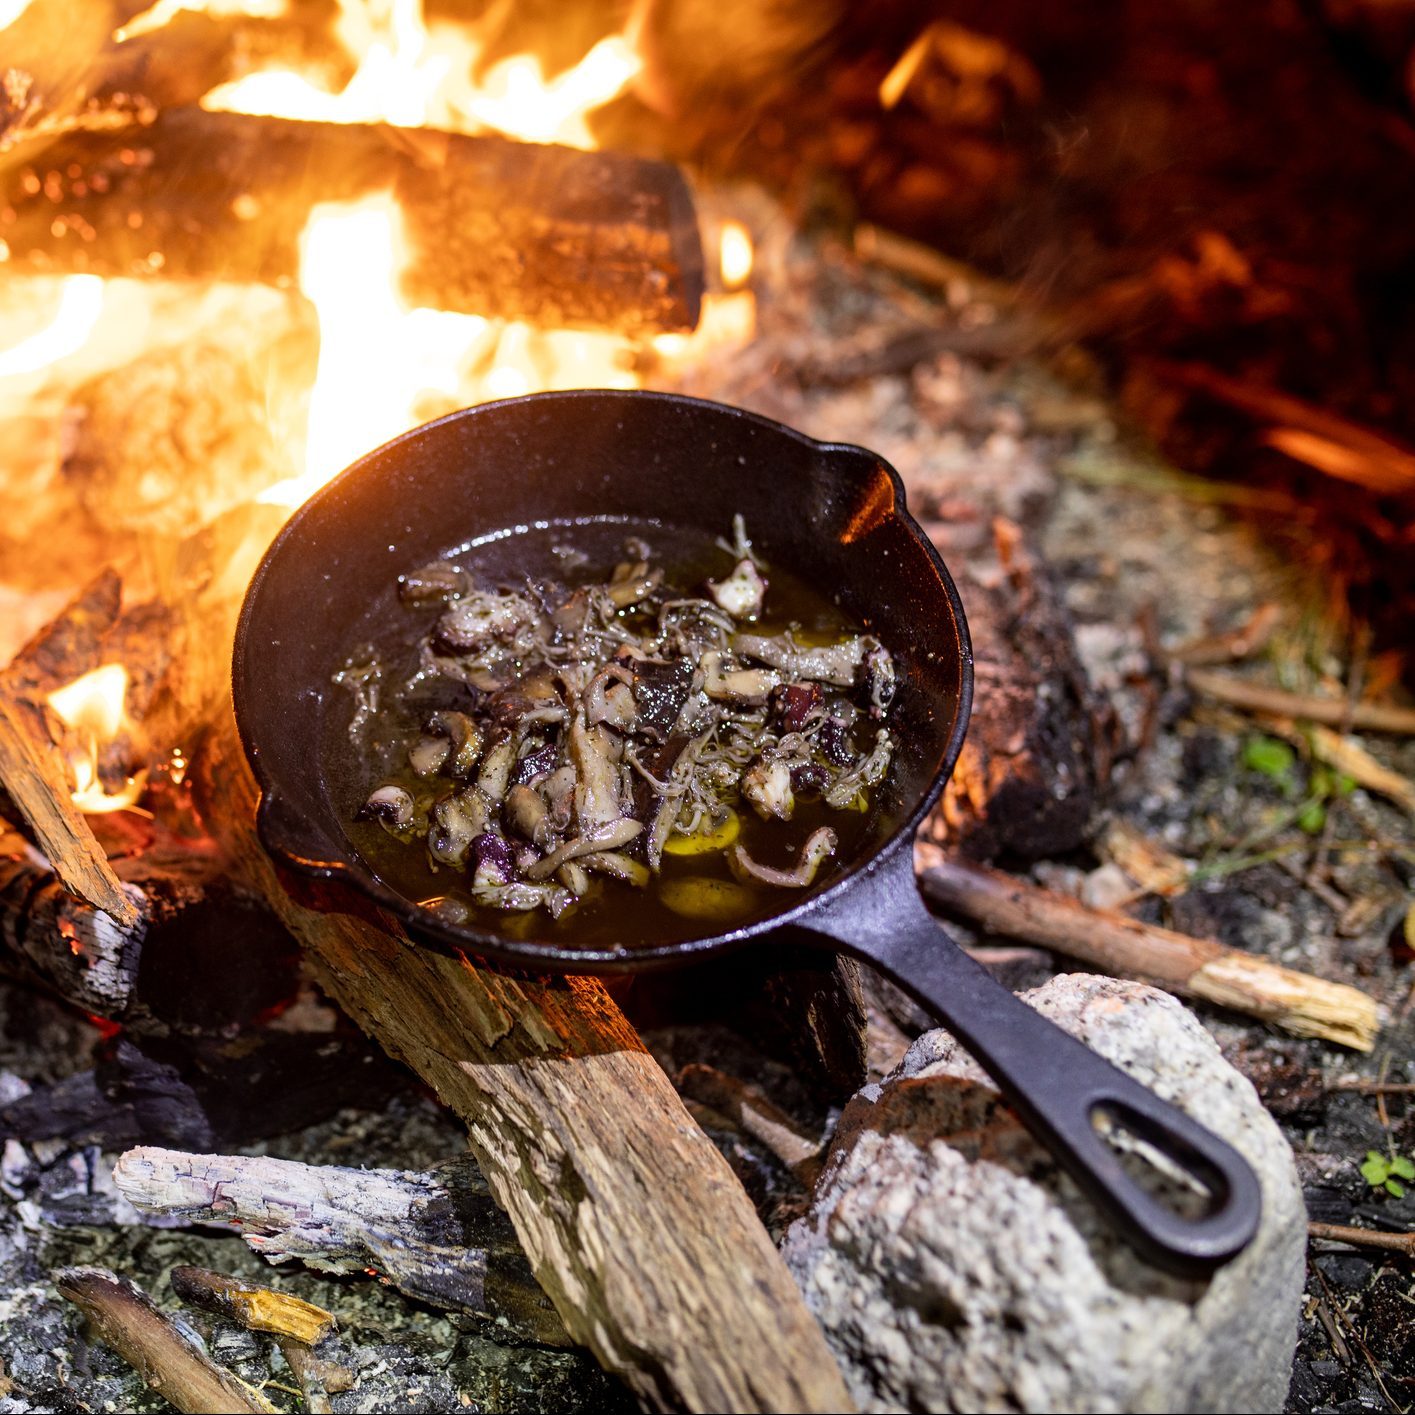 Campfire cooking with cast iron skillet